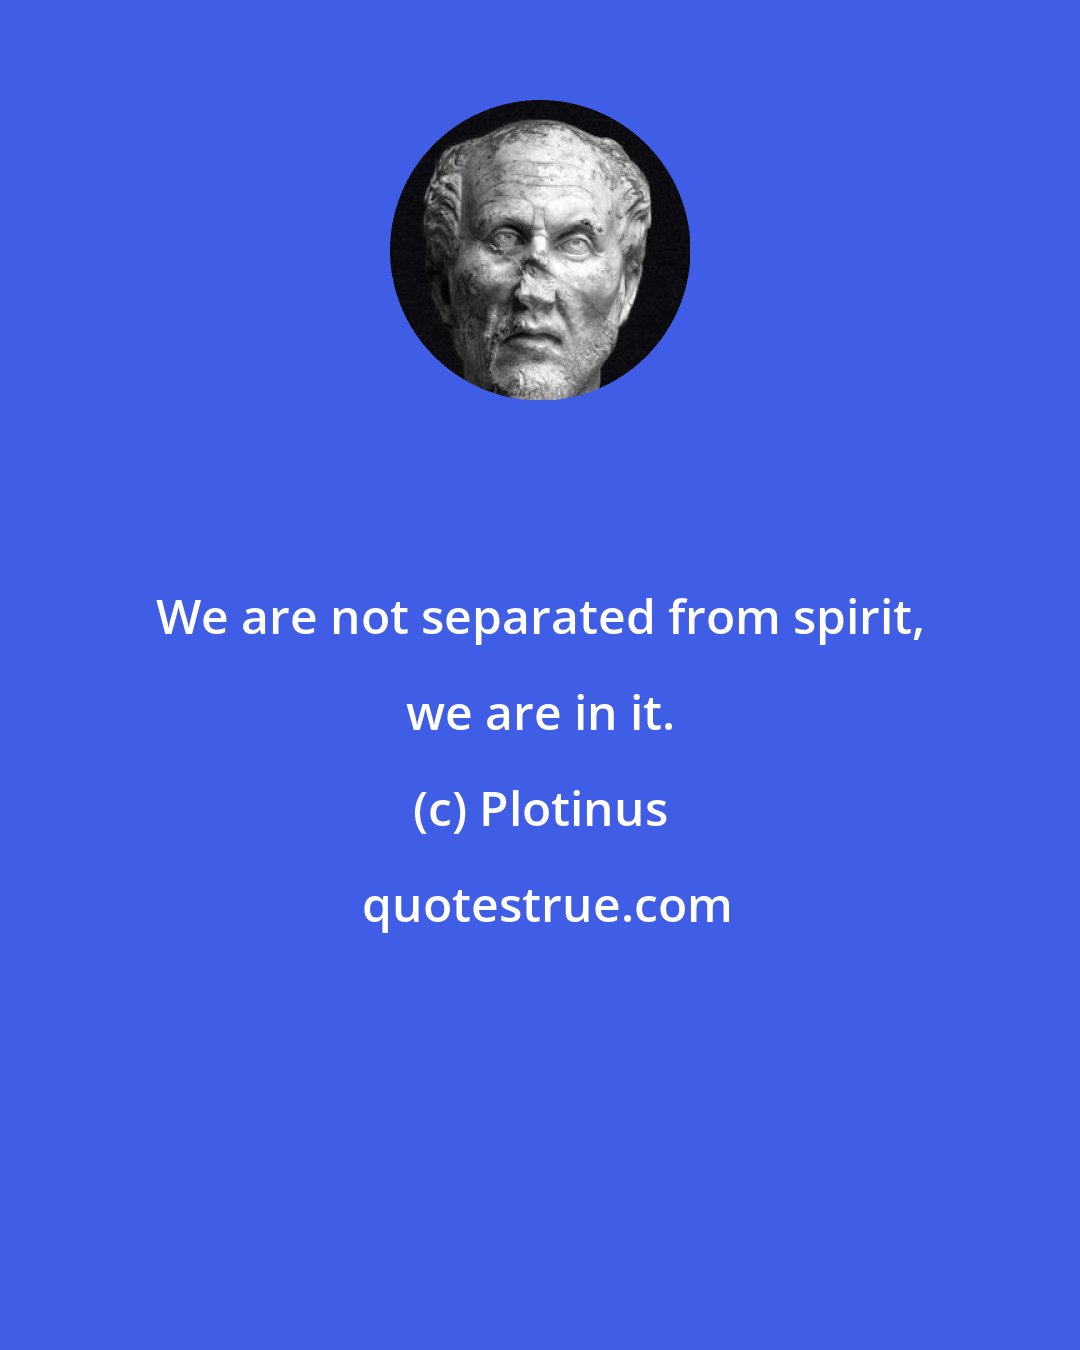 Plotinus: We are not separated from spirit, we are in it.